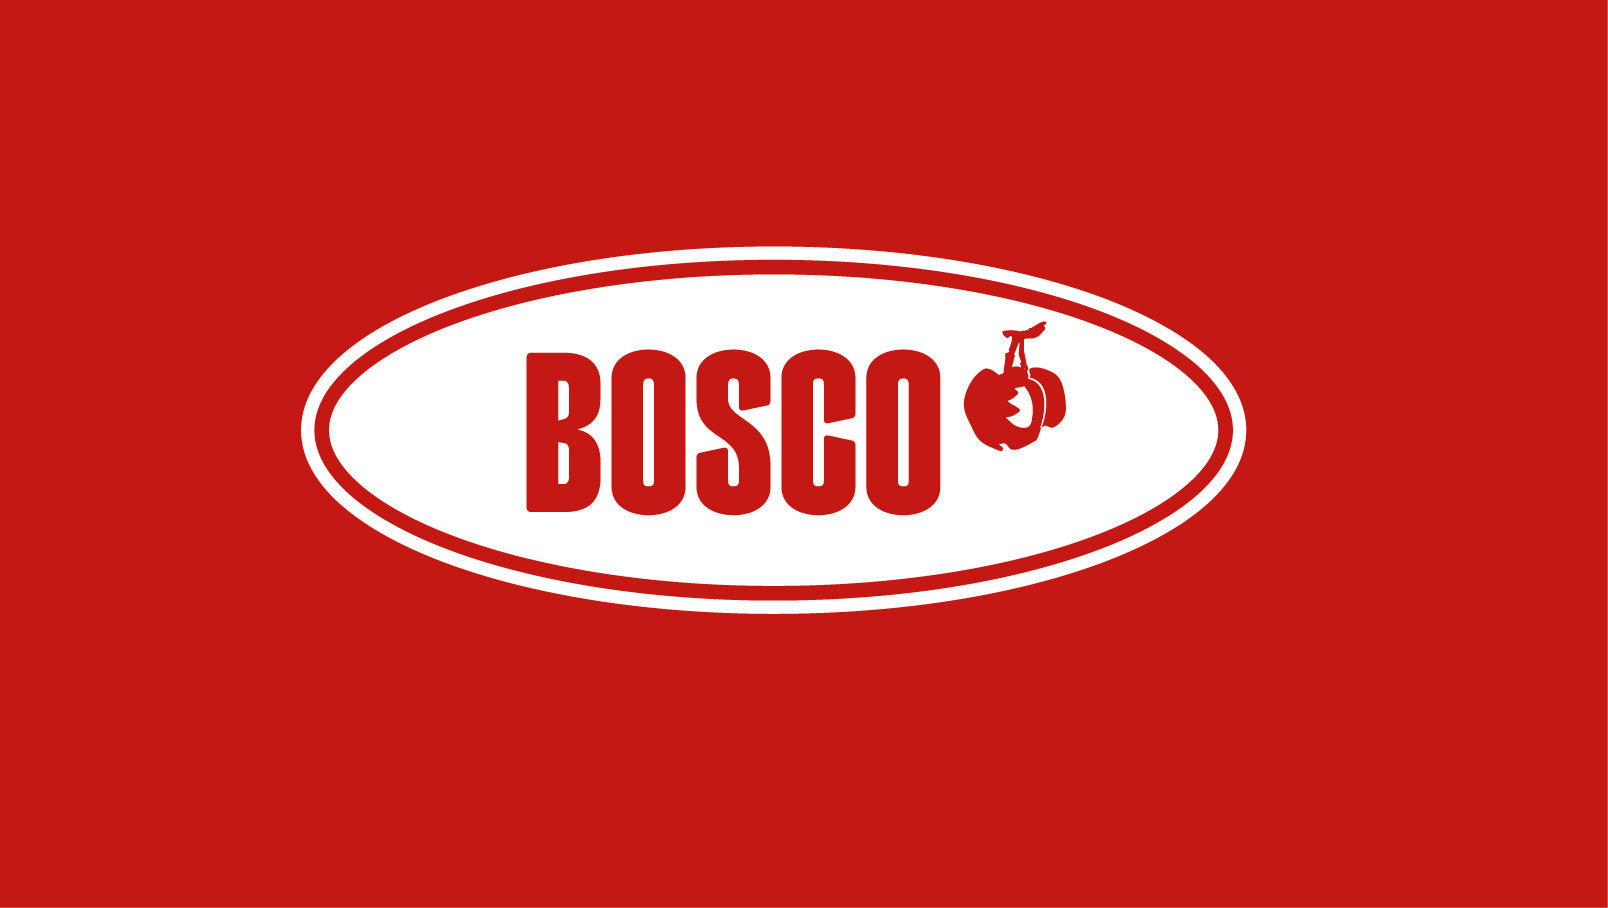 Bosco have reportedly asked for their kit not to be used at Pyeongchang 2018 ©Bosco